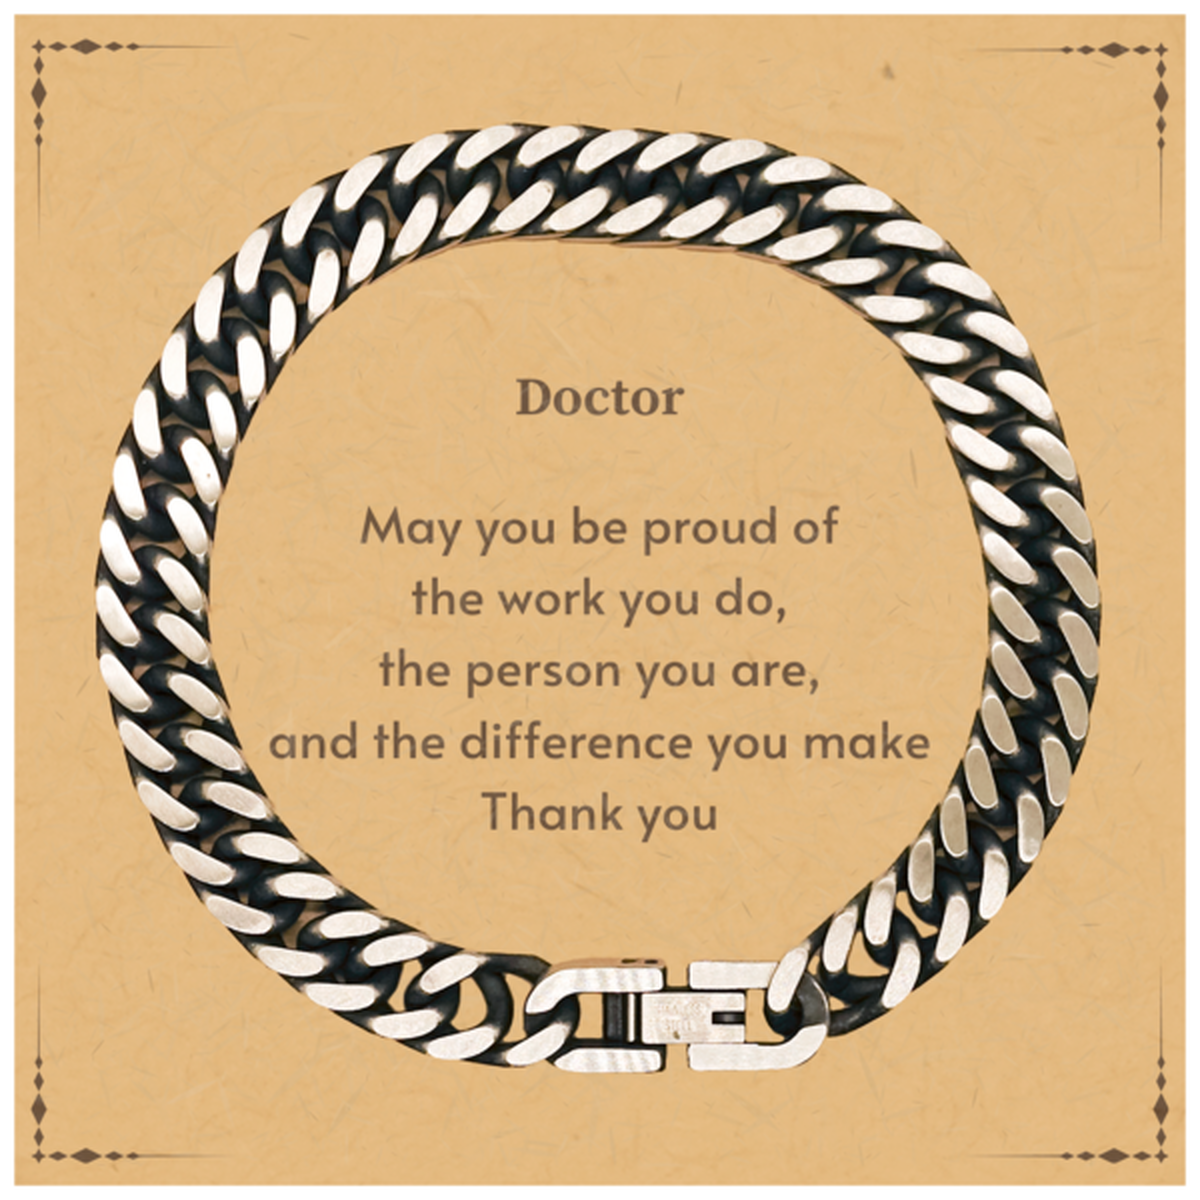 Heartwarming Cuban Link Chain Bracelet Retirement Coworkers Gifts for Doctor, Doctor May You be proud of the work you do, the person you are Gifts for Boss Men Women Friends